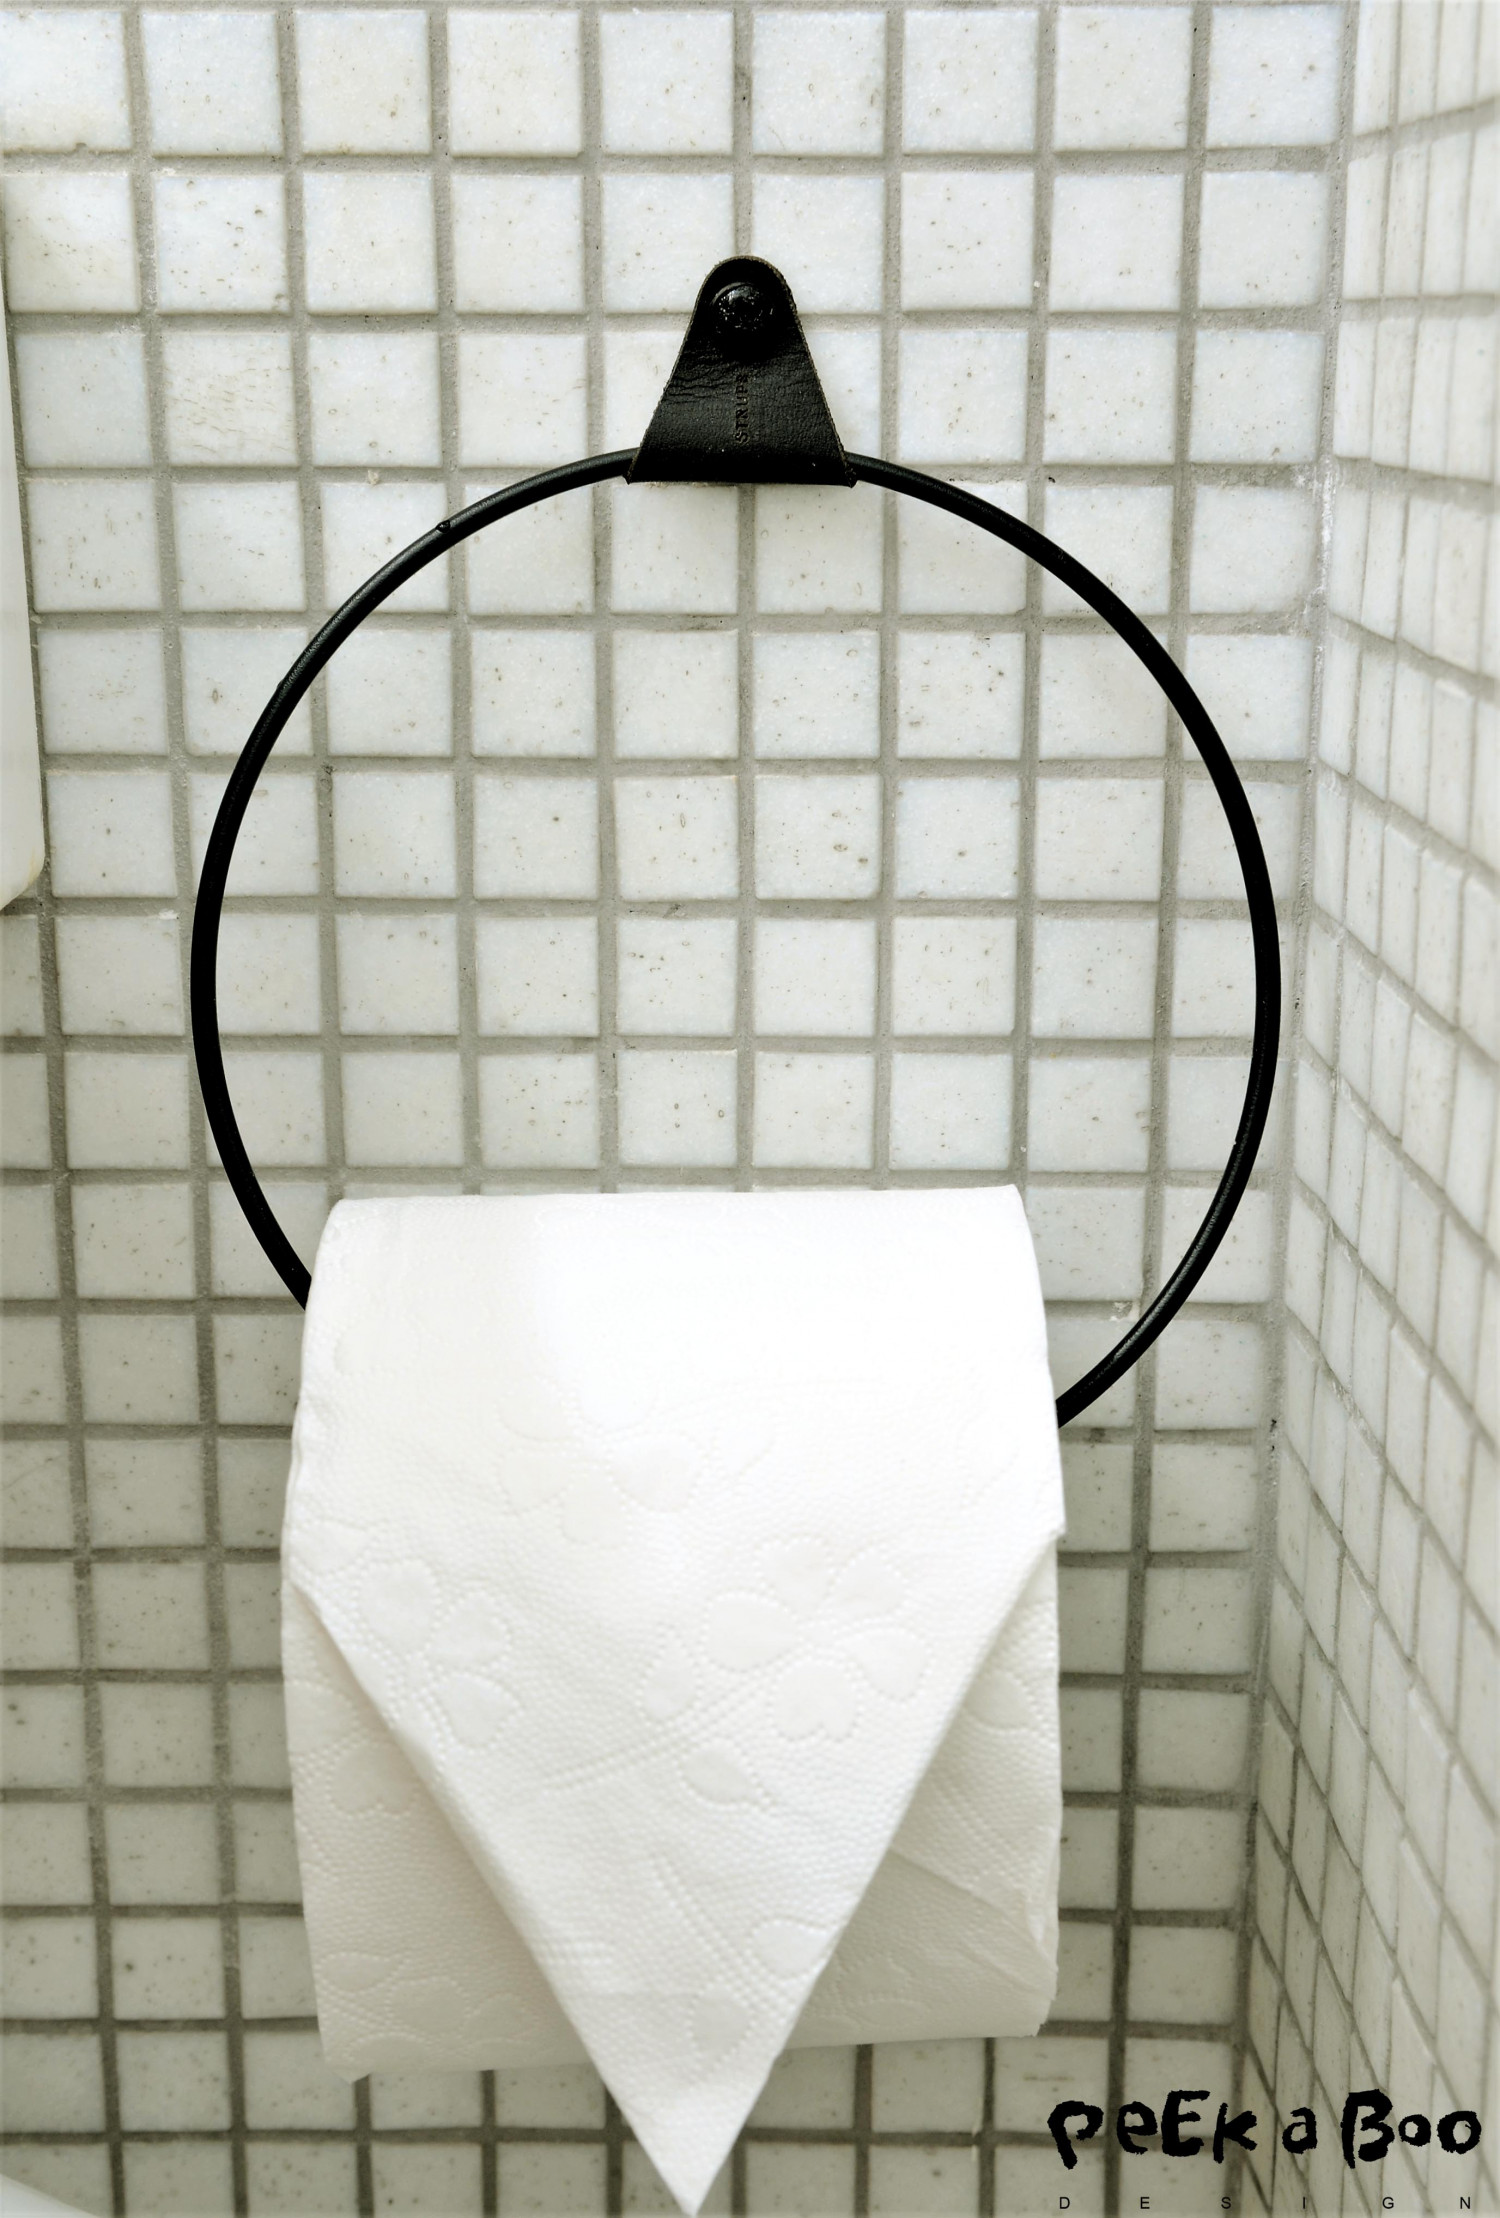 the ring used as a toiletpaper holder.